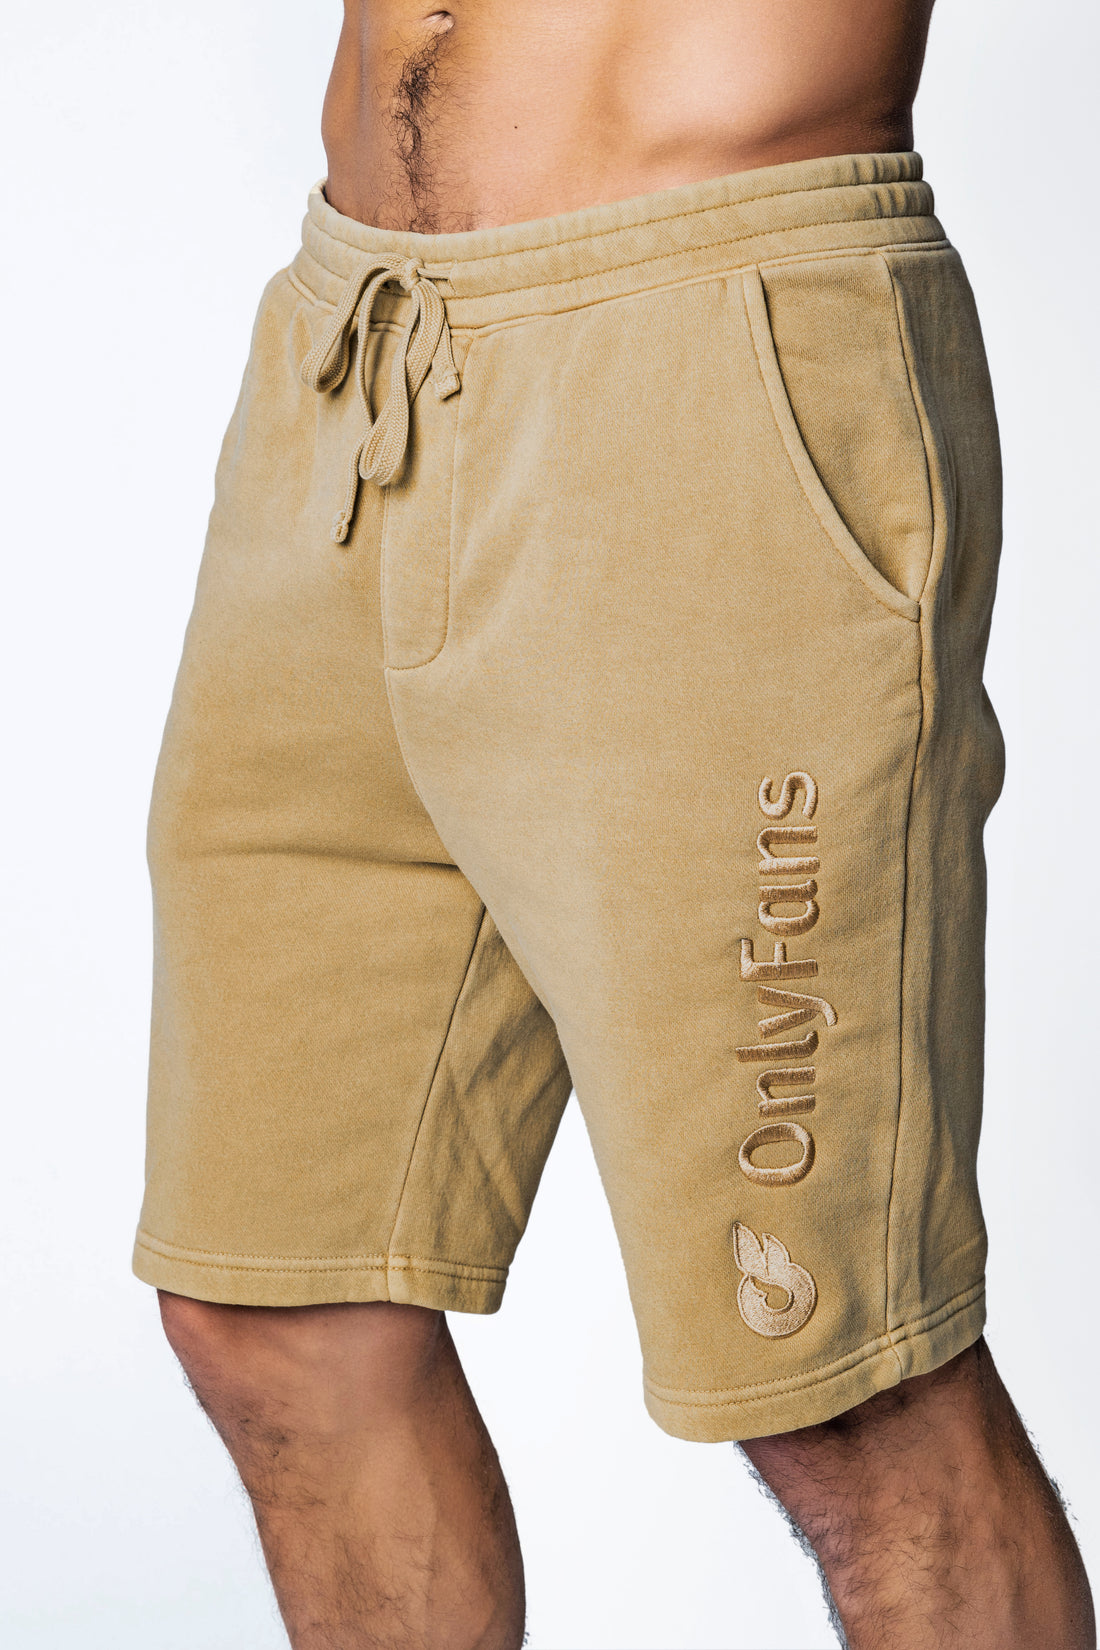 OnlyFans Shorts - Tan